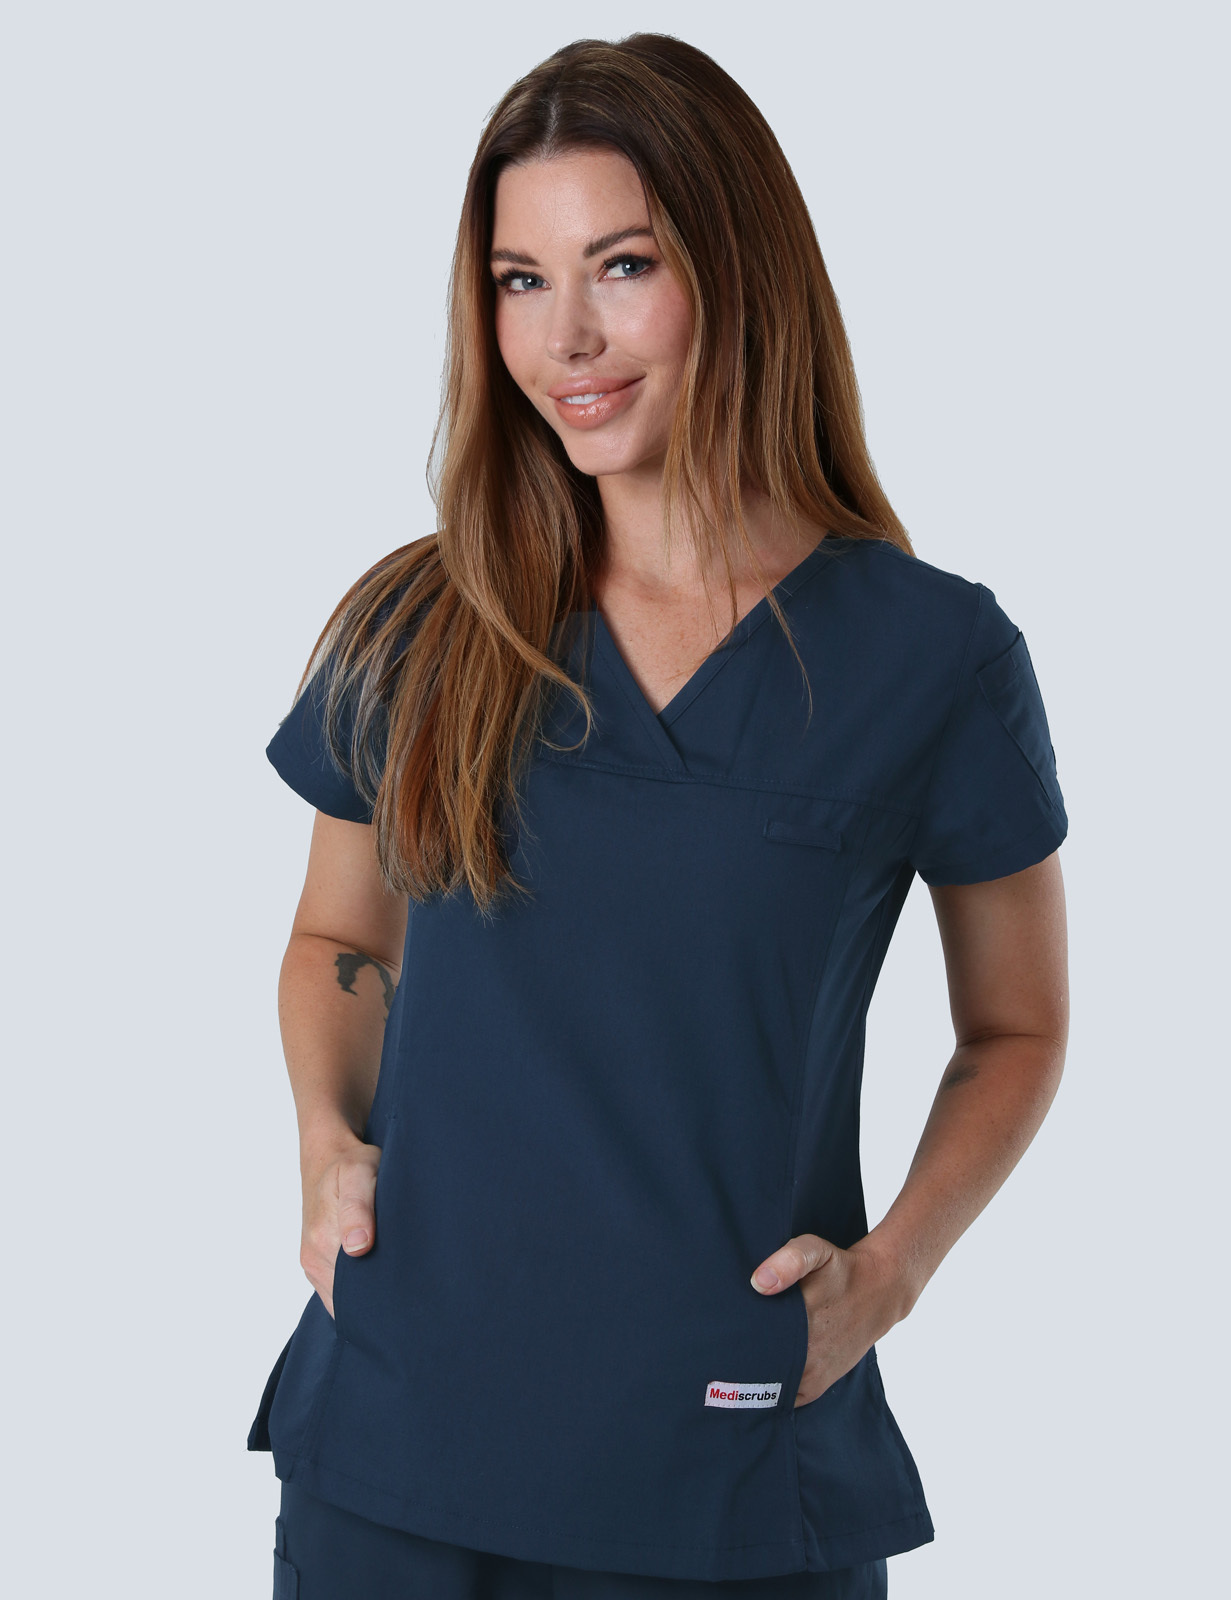 Gladstone Hospital - ED CN (Women's Fit Solid Scrub Top and Cargo Pants in Navy incl Logos)